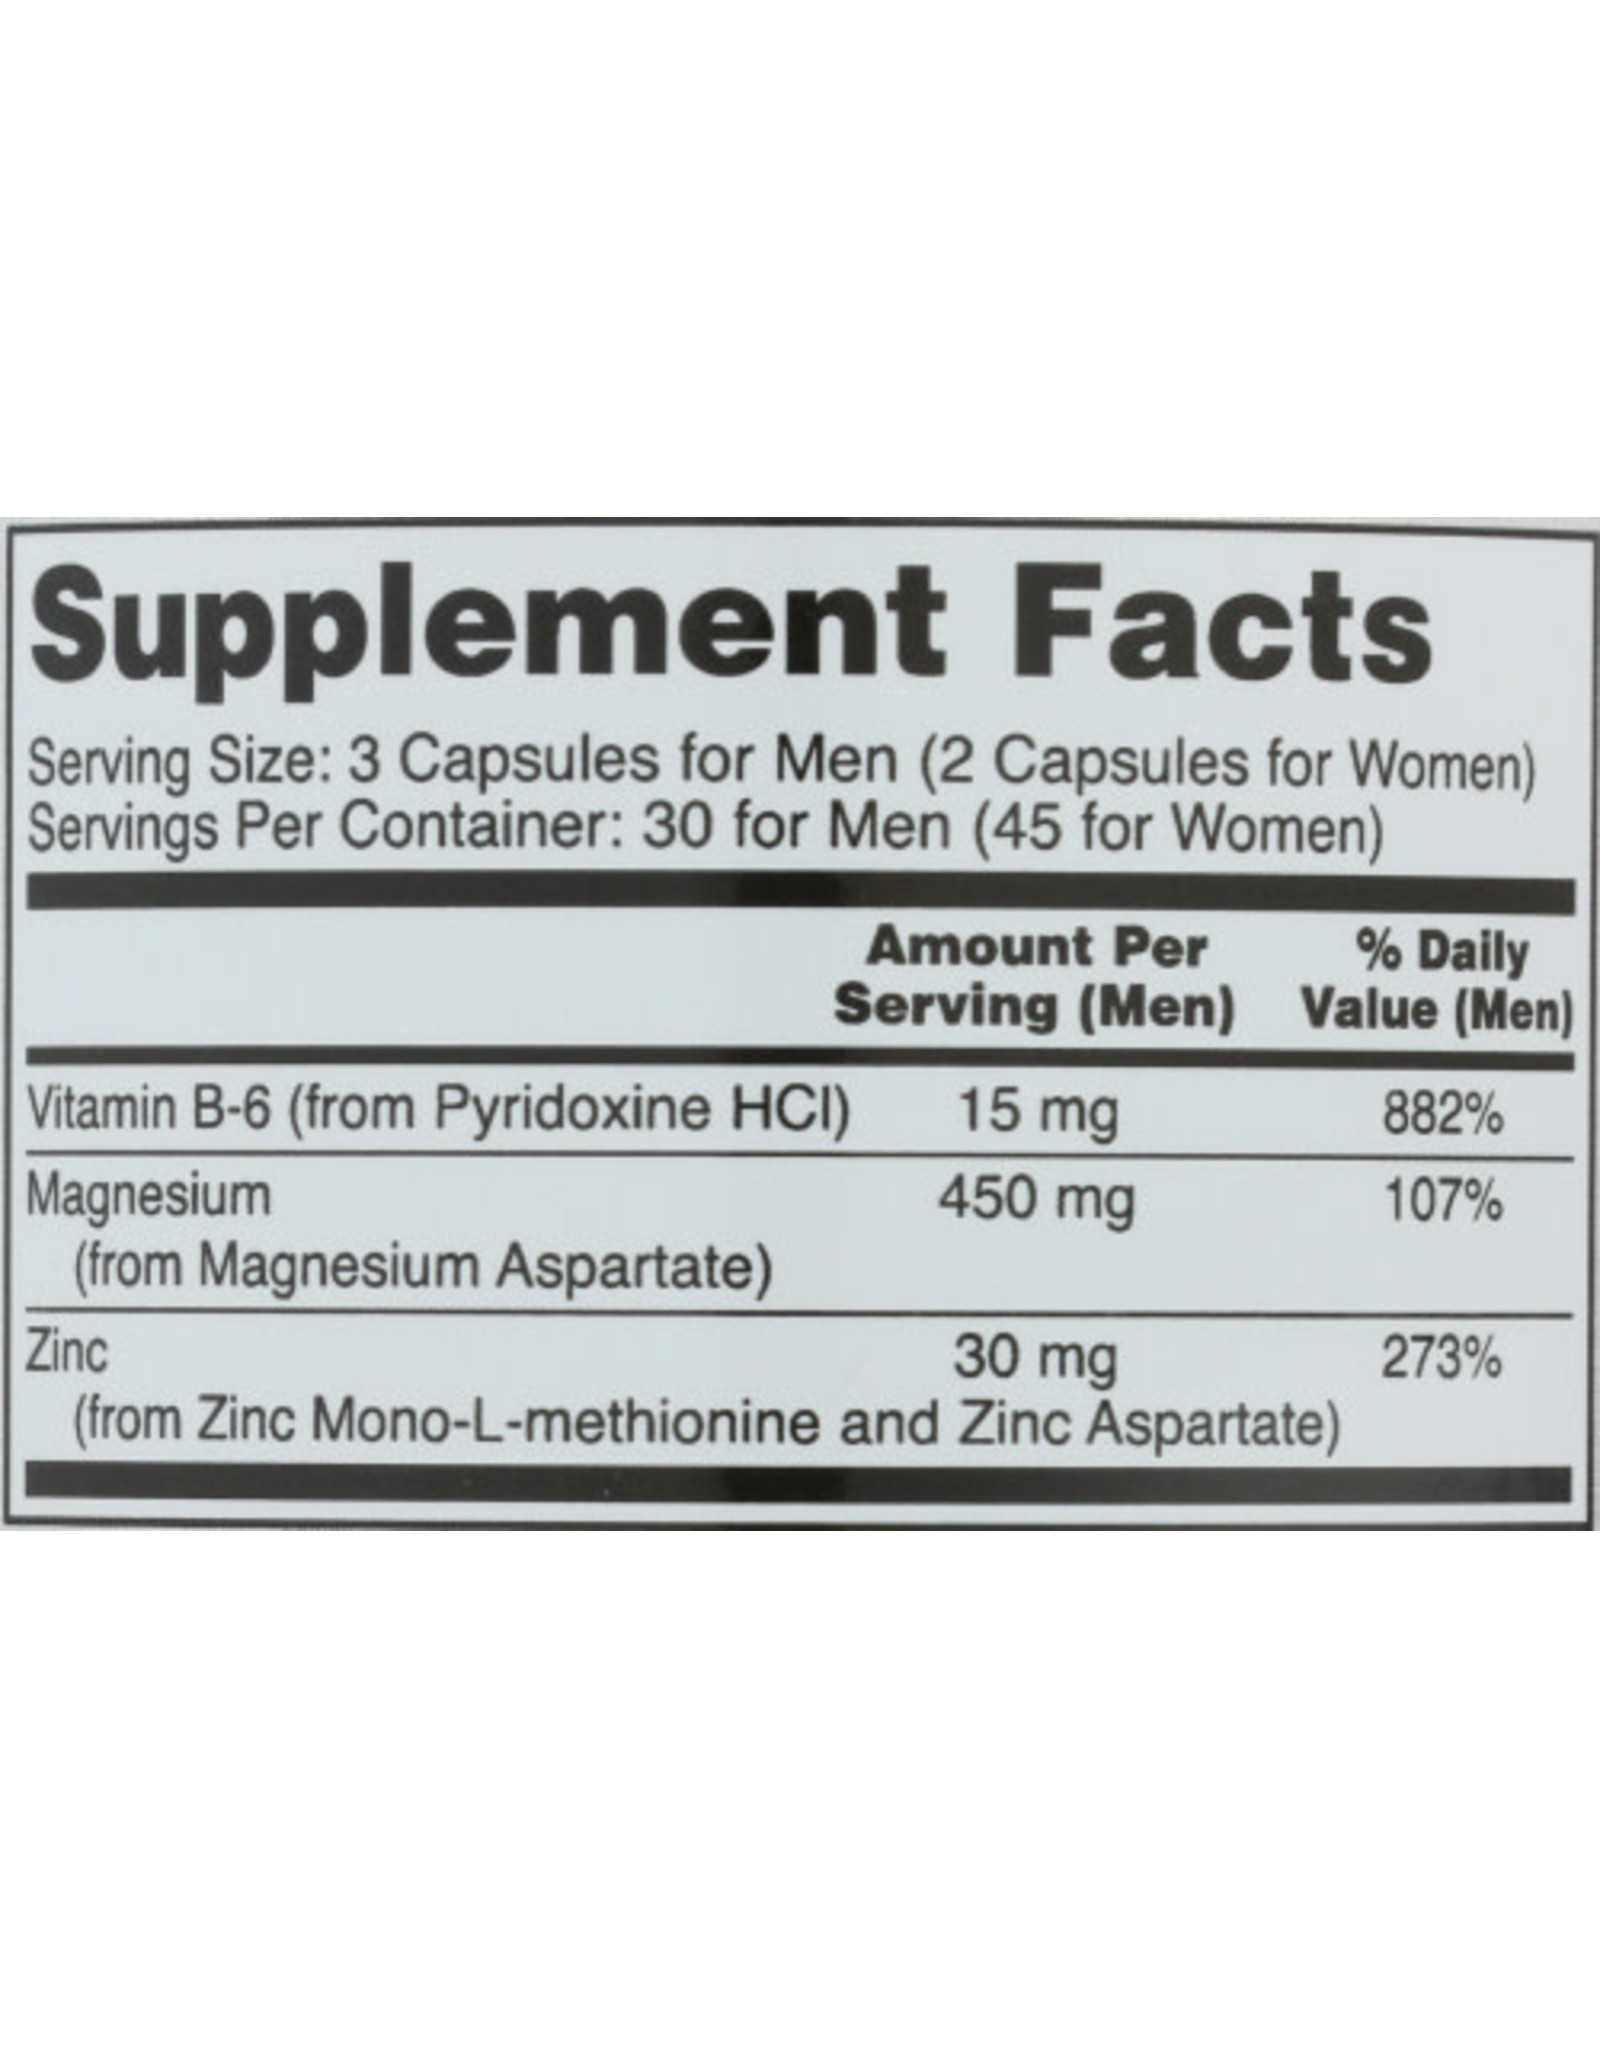 NOW SPORTS® NOW SPORTS ZMA 800 MG, 90 CAPSULES